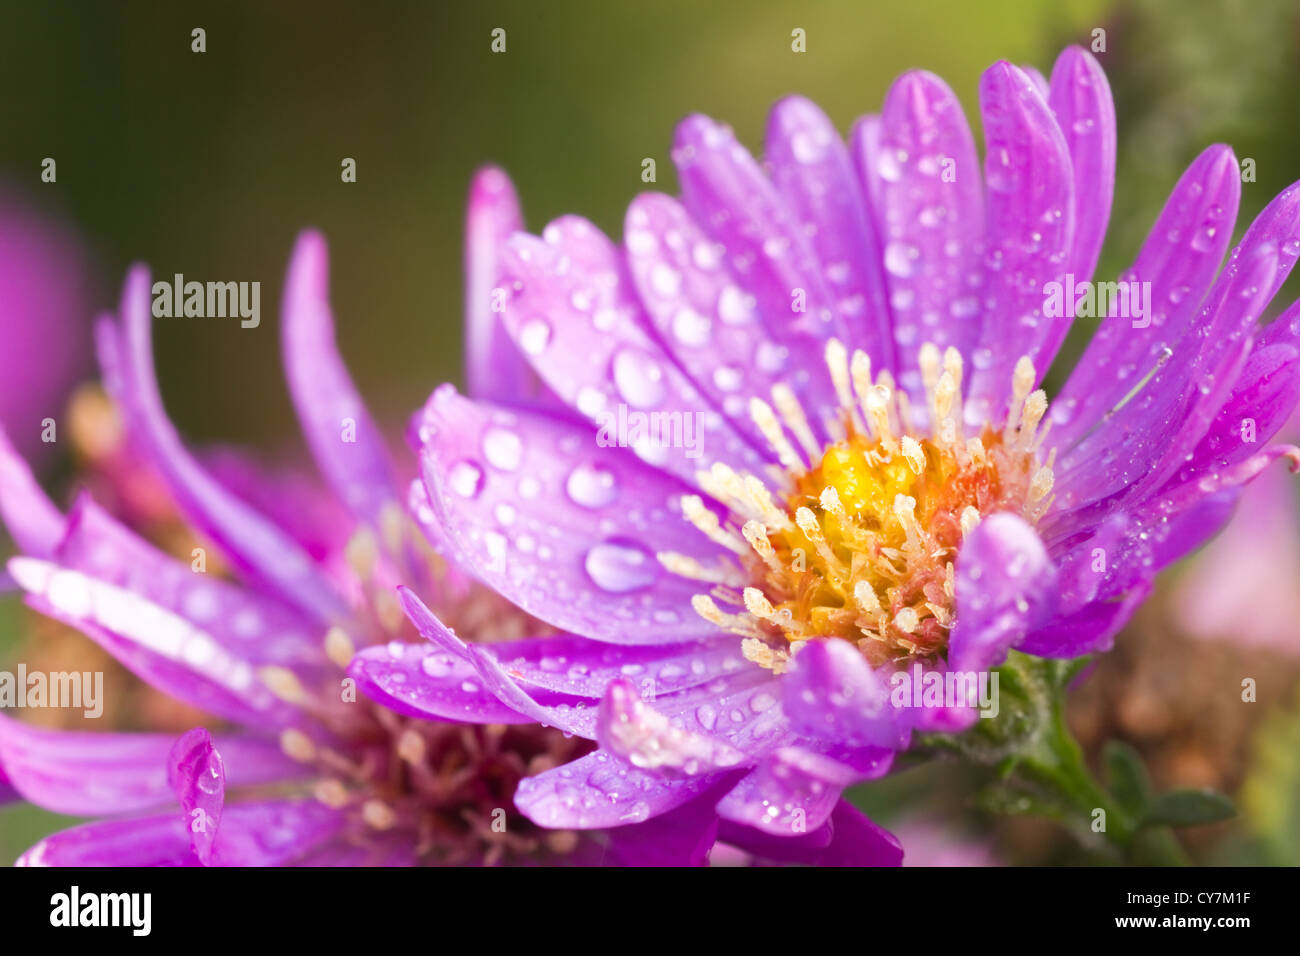 New York aster or Michaelmas daisy with waterdrops flowering in autumn sunshine Stock Photo